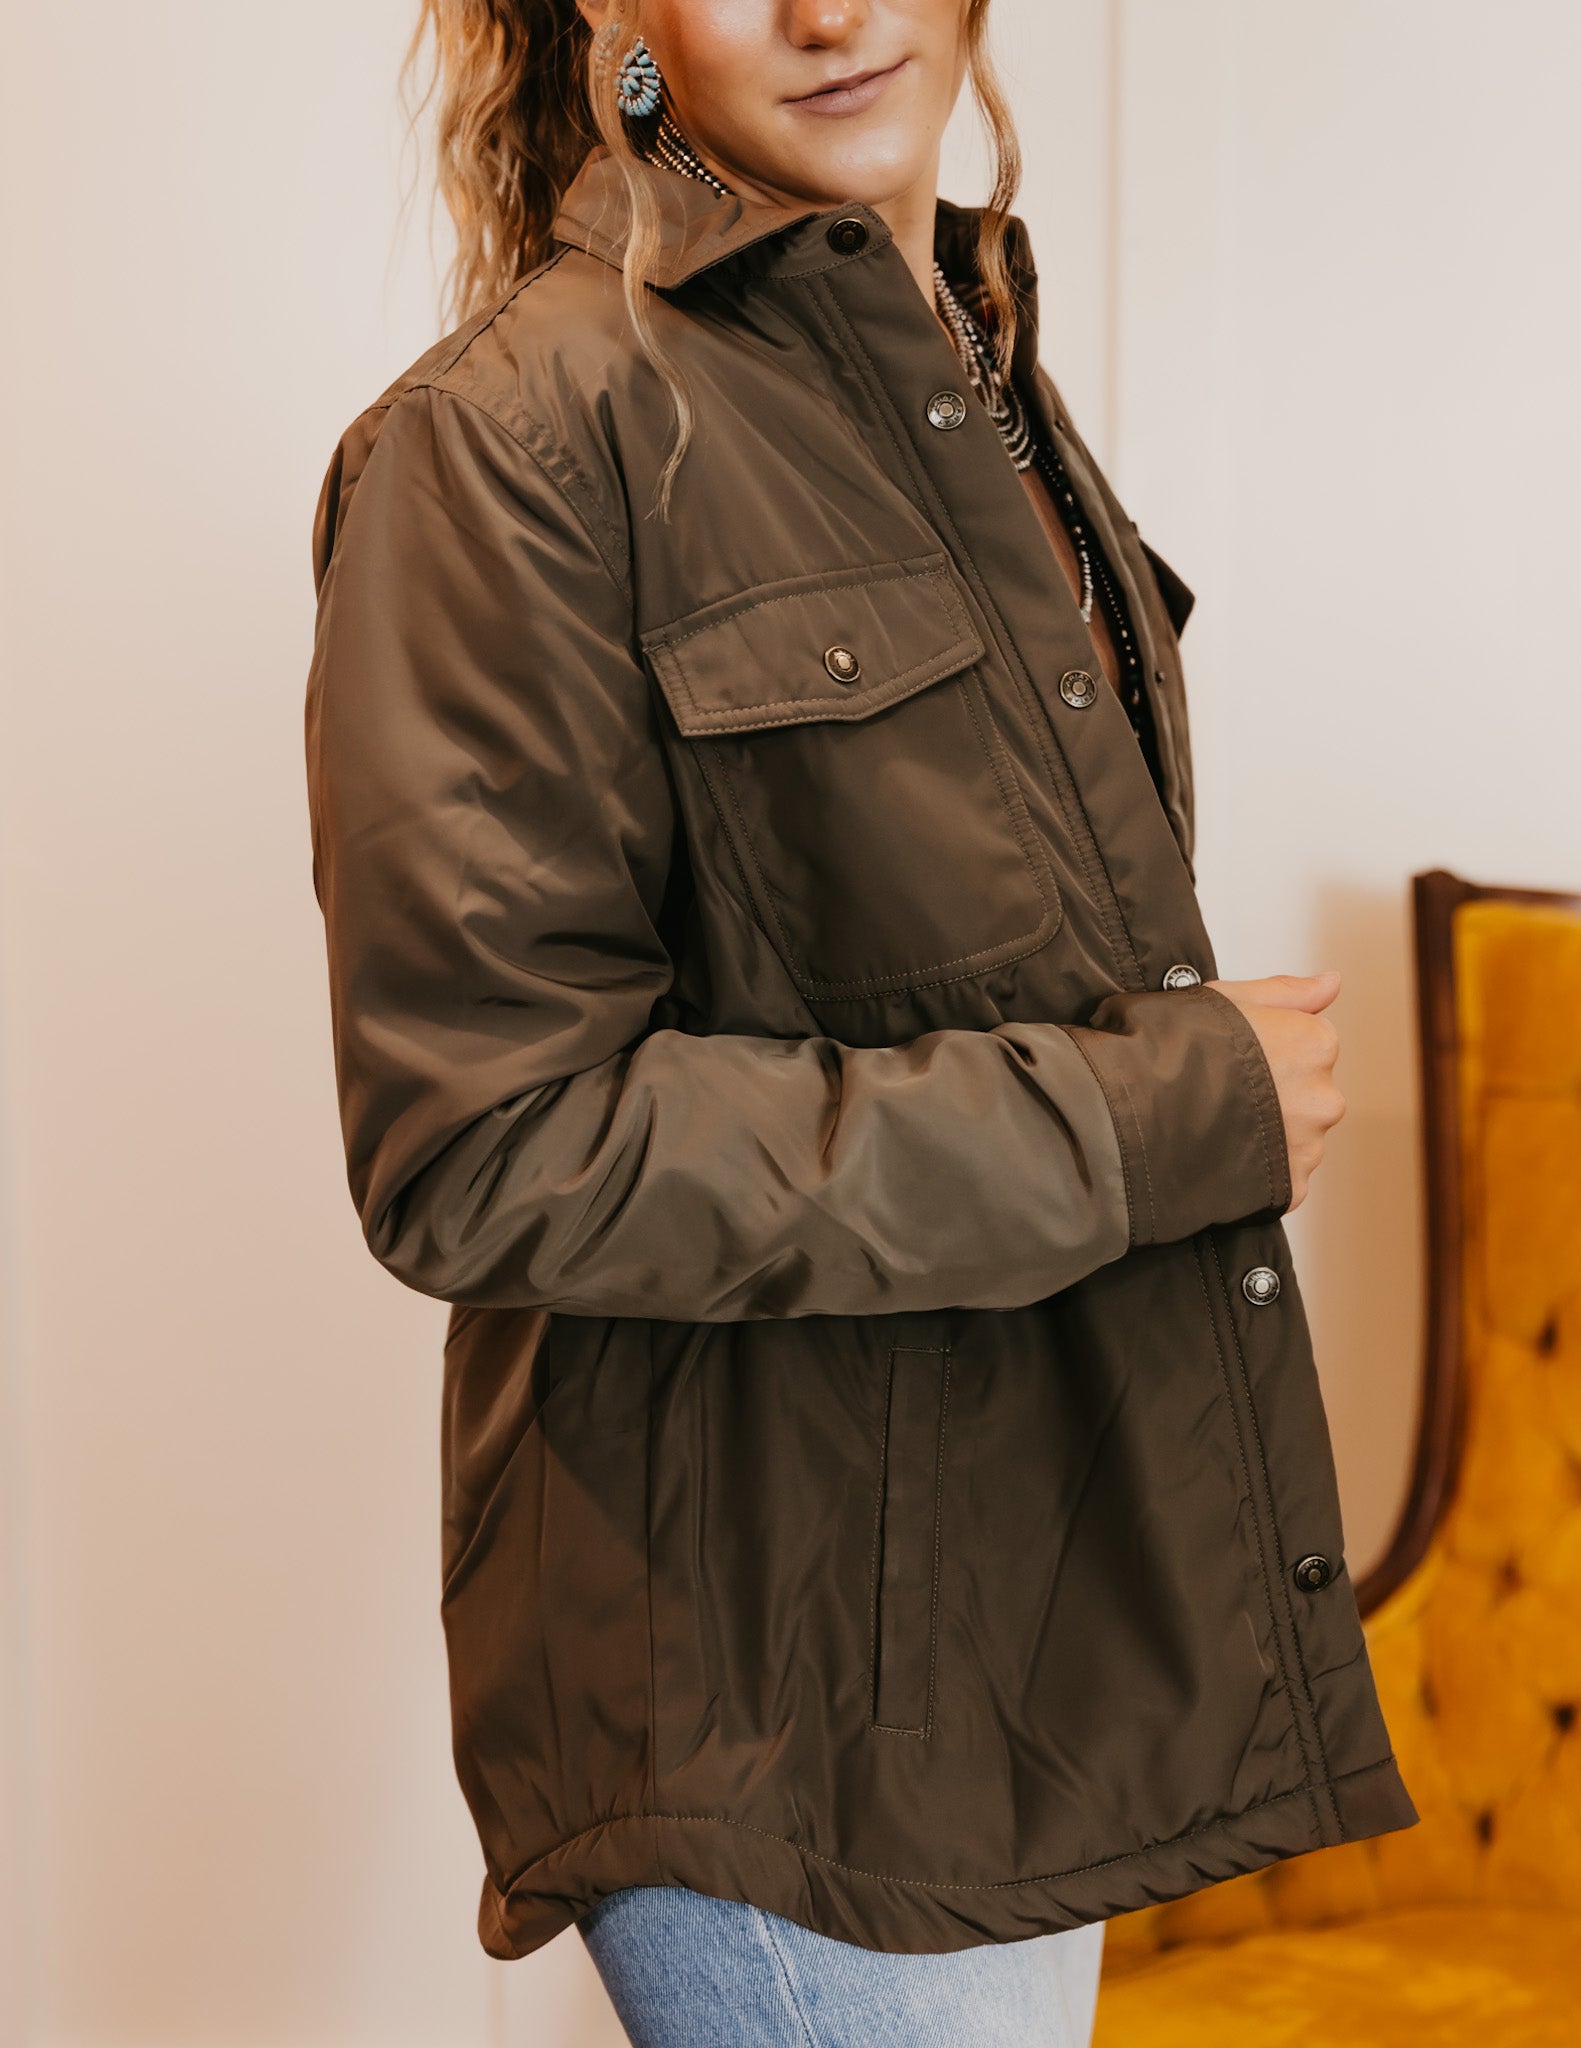 Ariat Dilon Jacket in Canteen